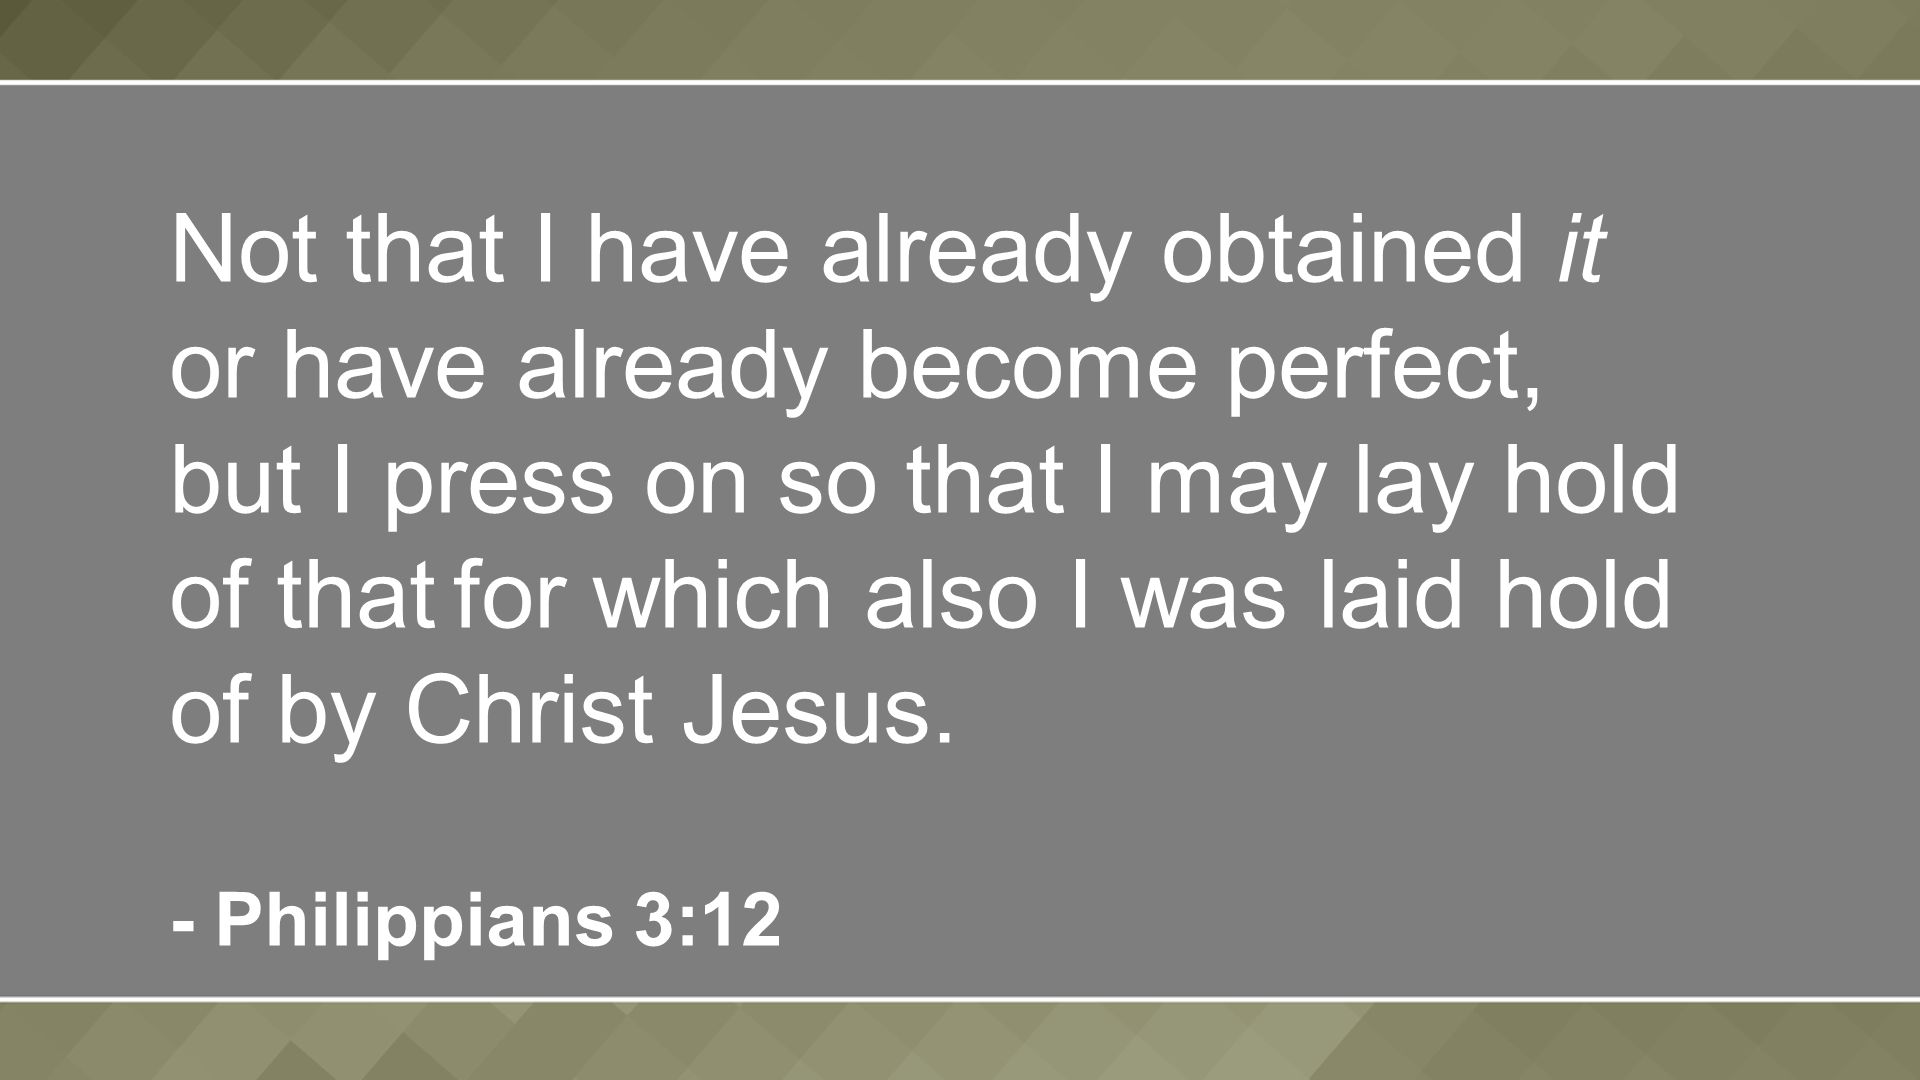 Not that I have already obtained it or have already become perfect, but I press on so that I may lay hold of that for which also I was laid hold of by Christ Jesus.